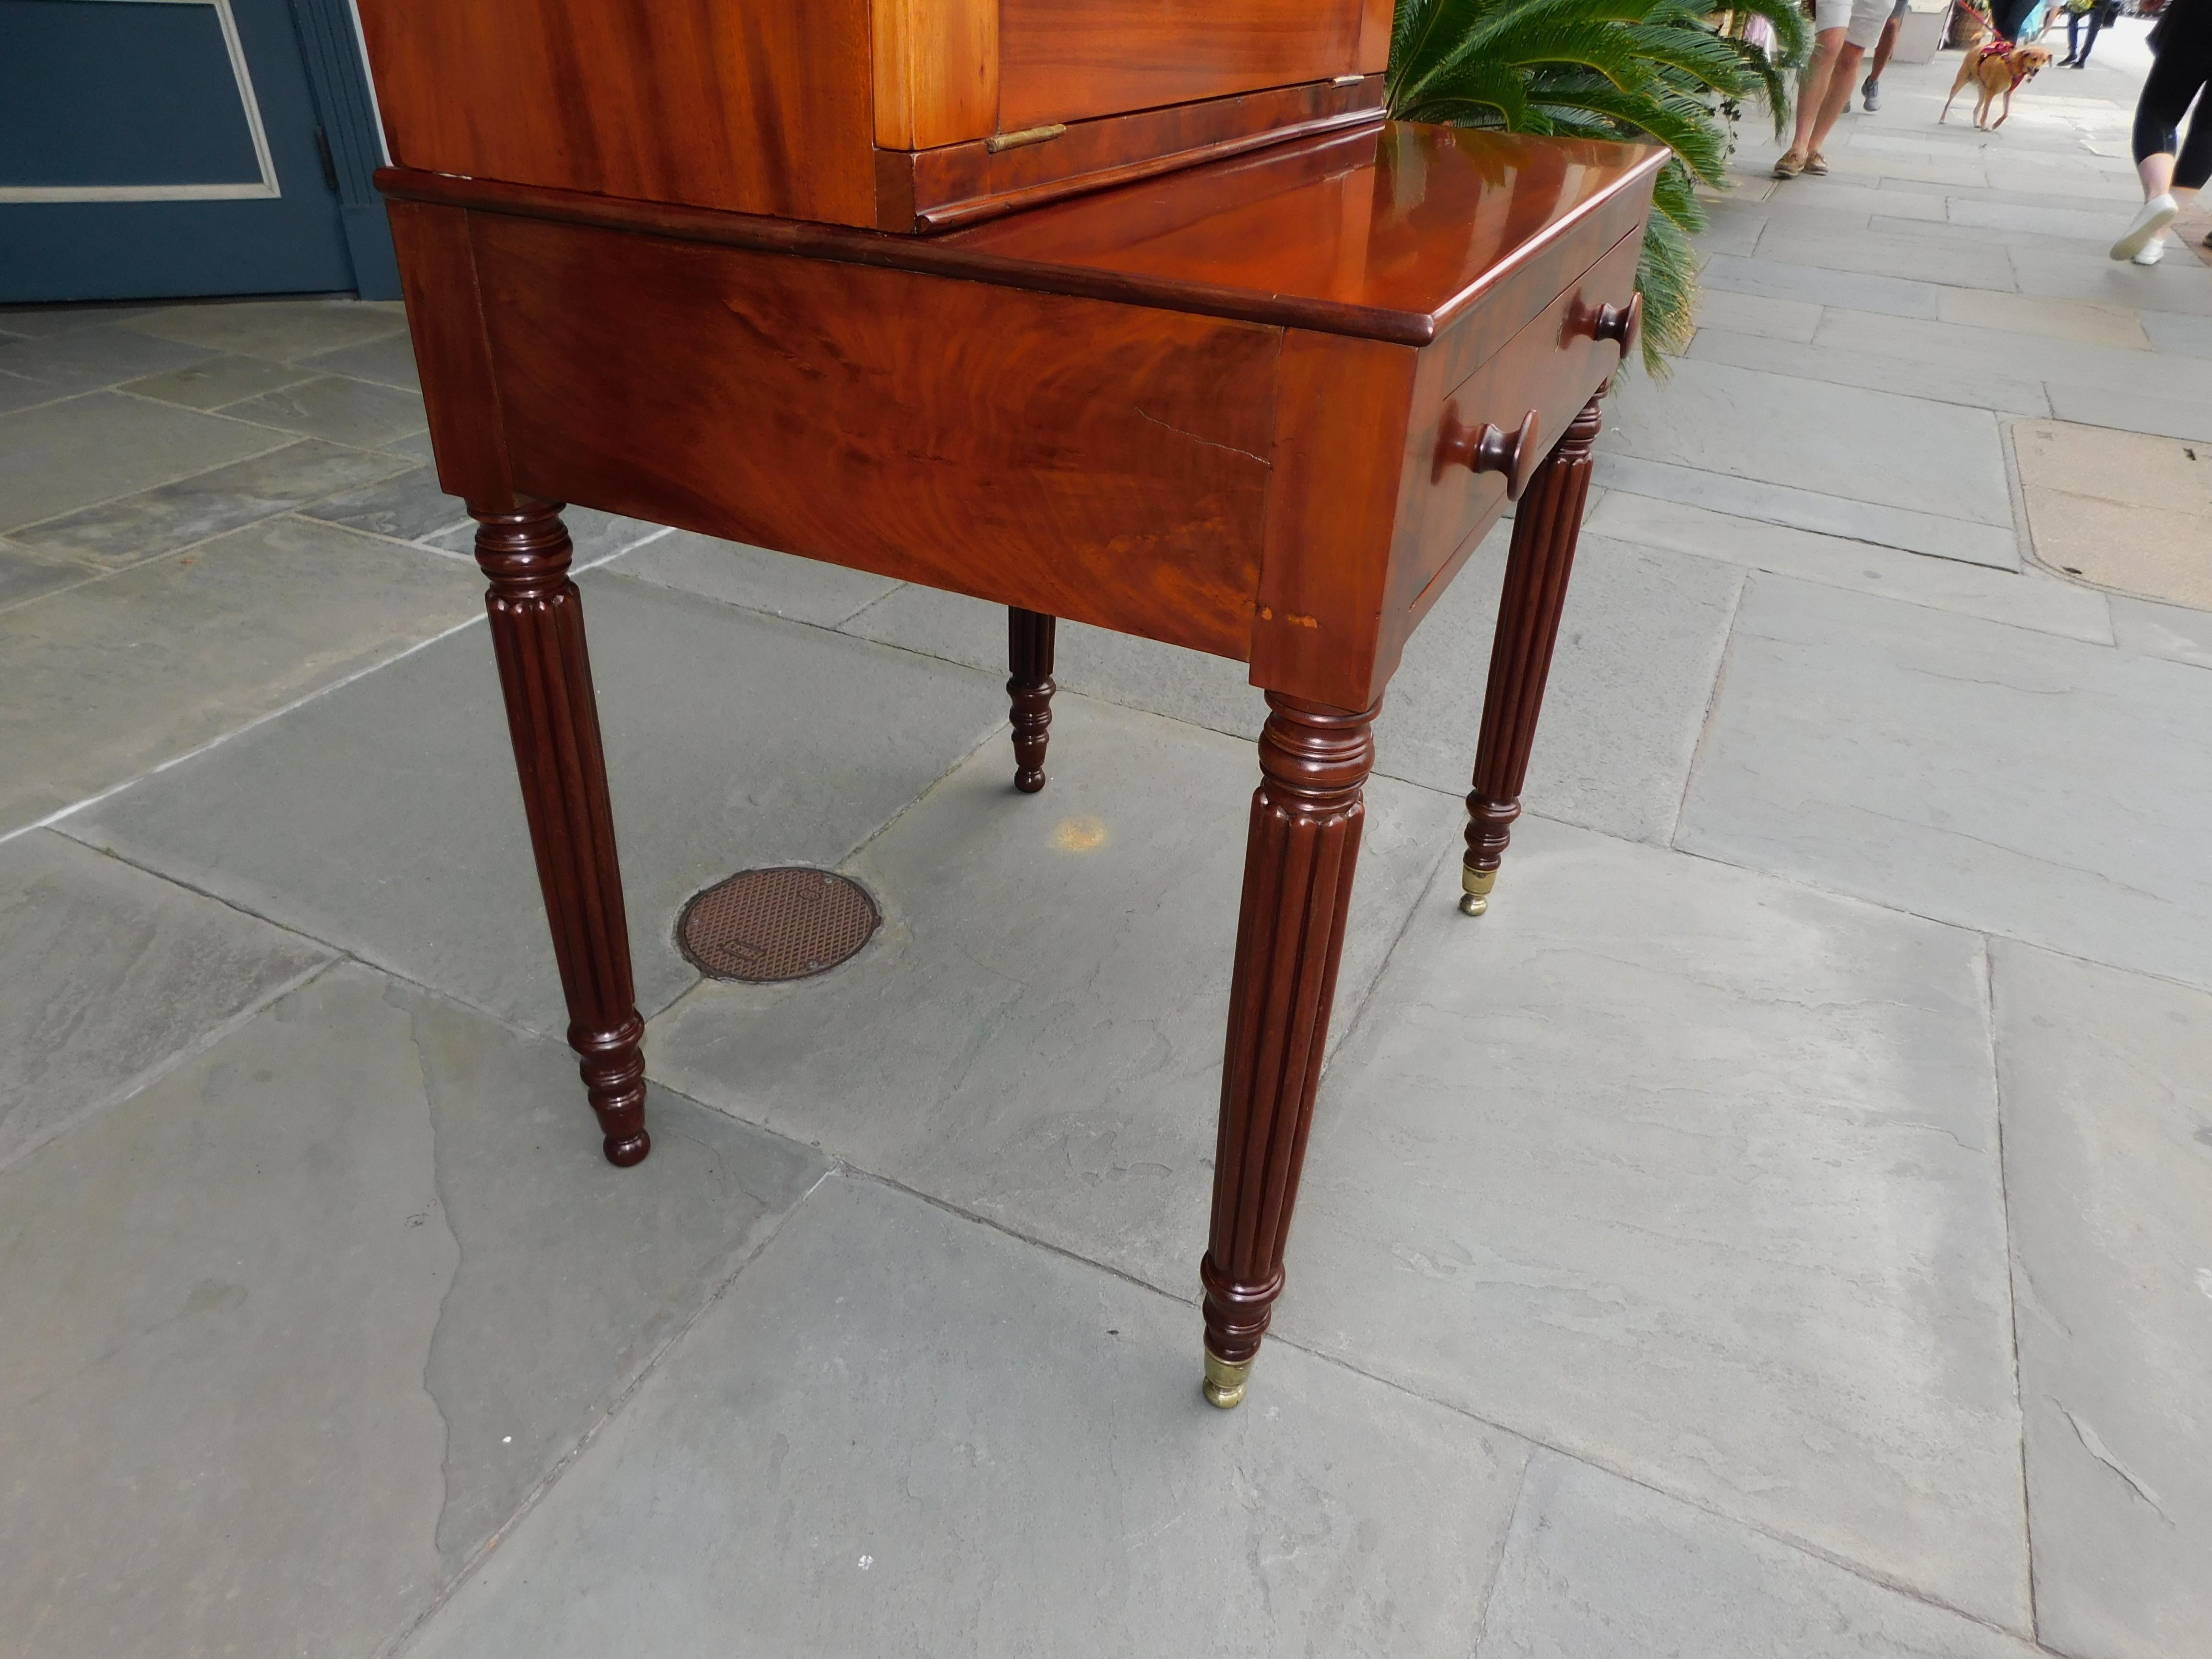 American Southern Mahogany and Leather Plantation Desk with Reeded Legs, C. 1810 For Sale 1